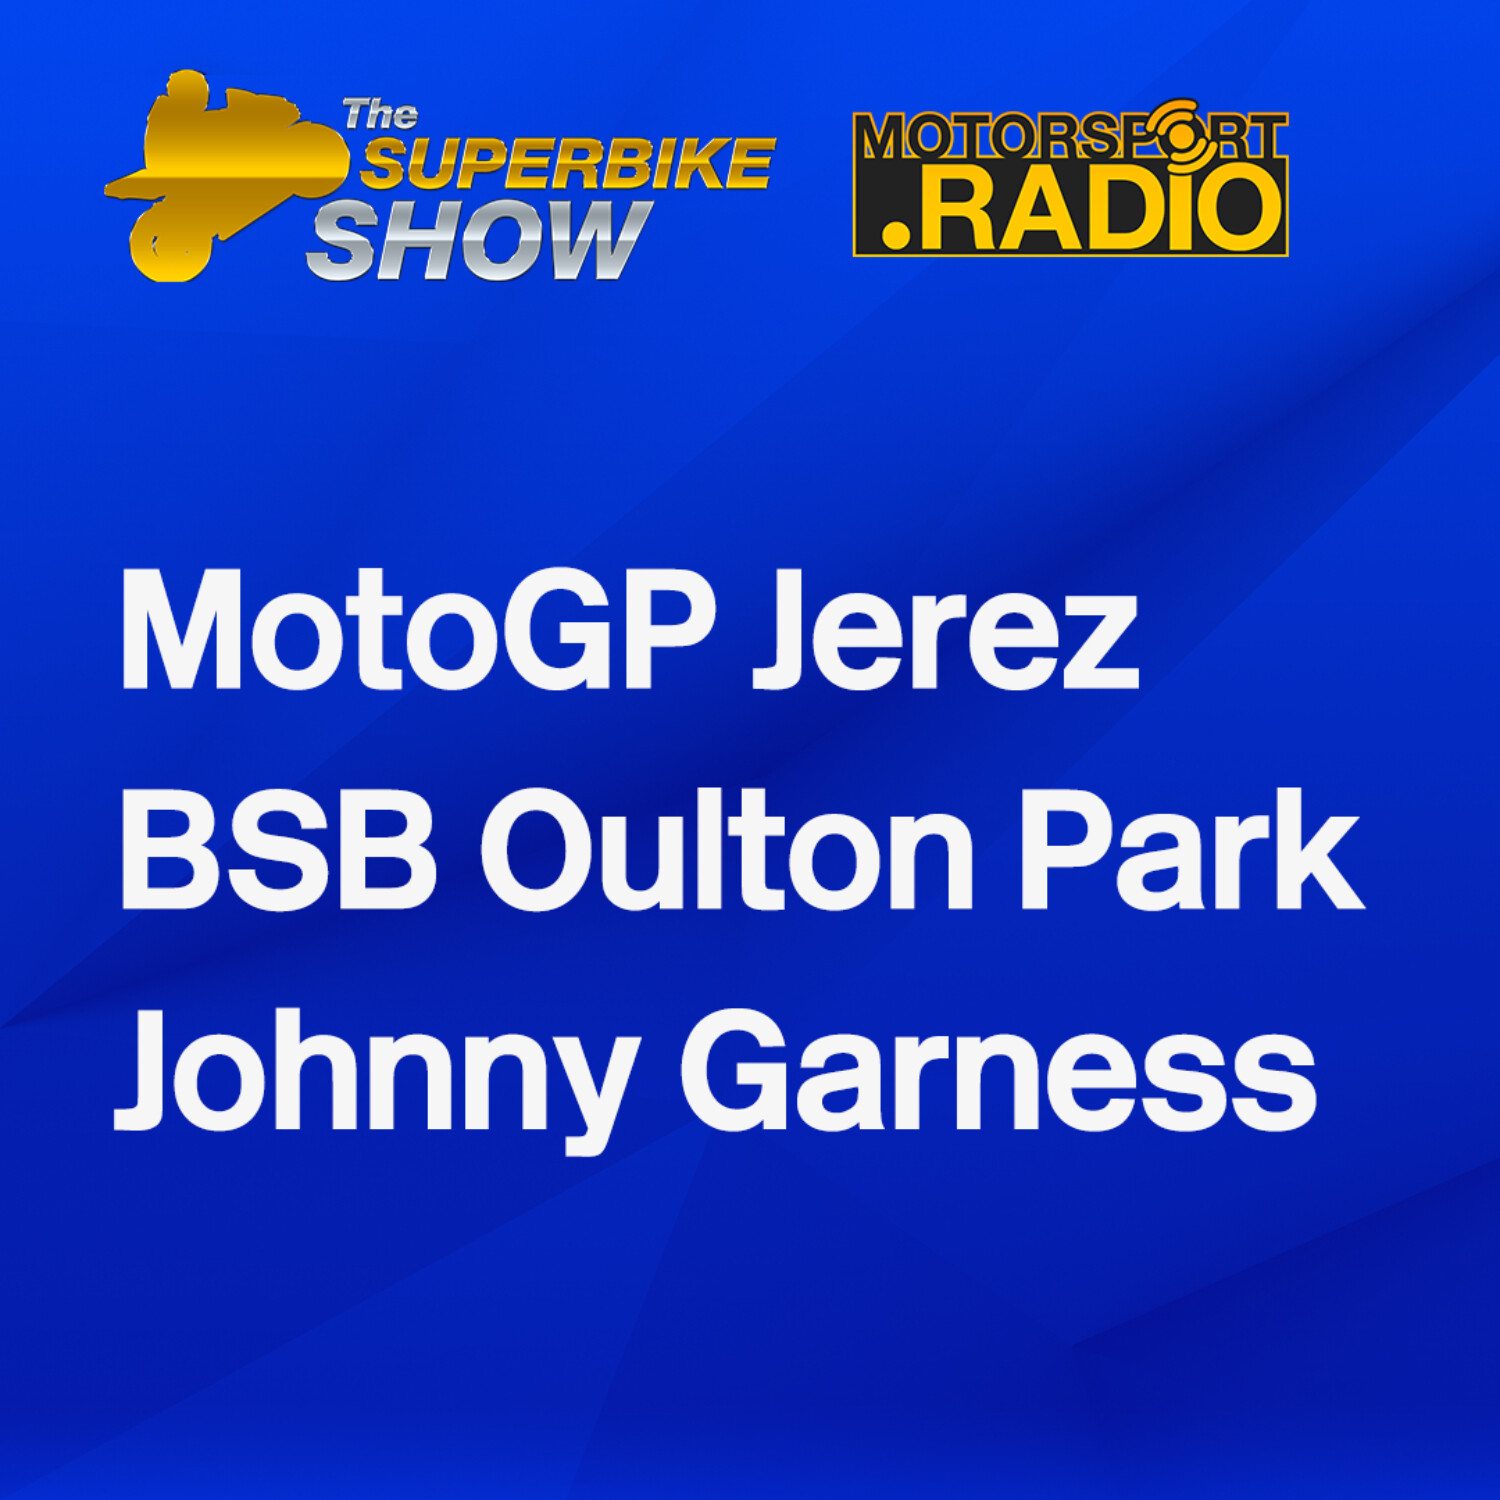 The Superbike Show - #MotoGP #SpanishGP Review and BSB Oulton Park